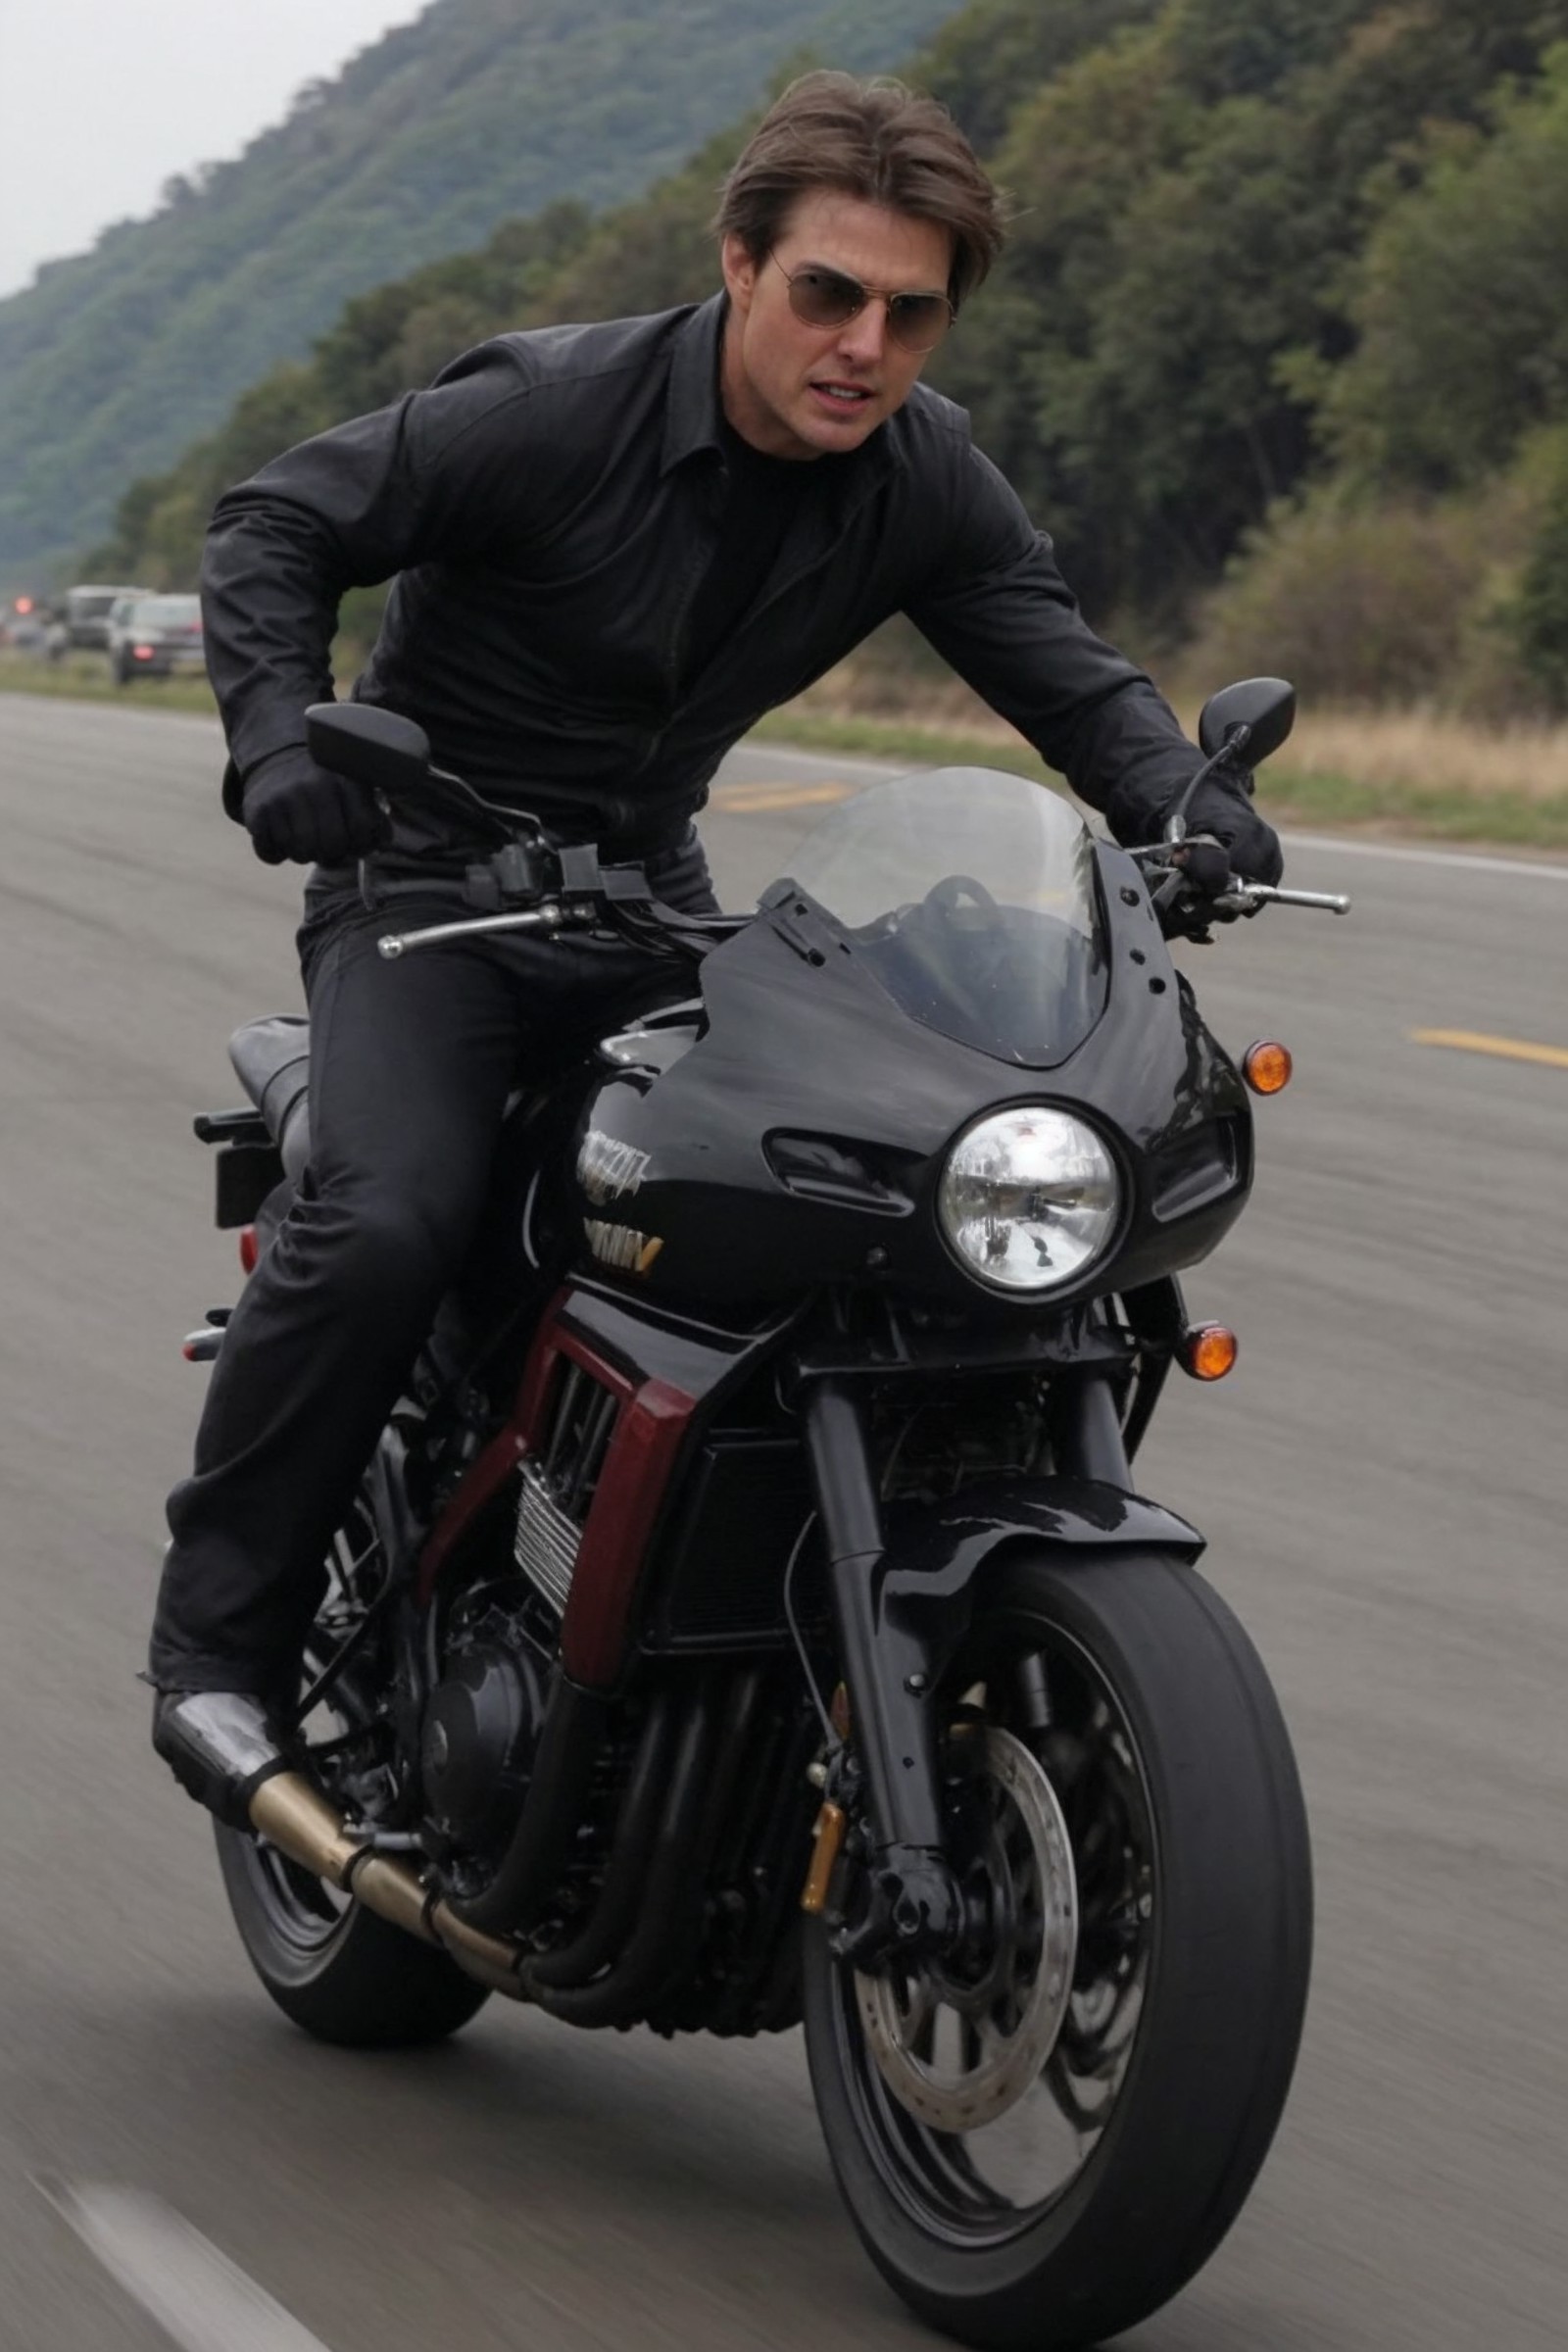 Tom Cruise,Mission Impossible,explosion,chasing motorbike